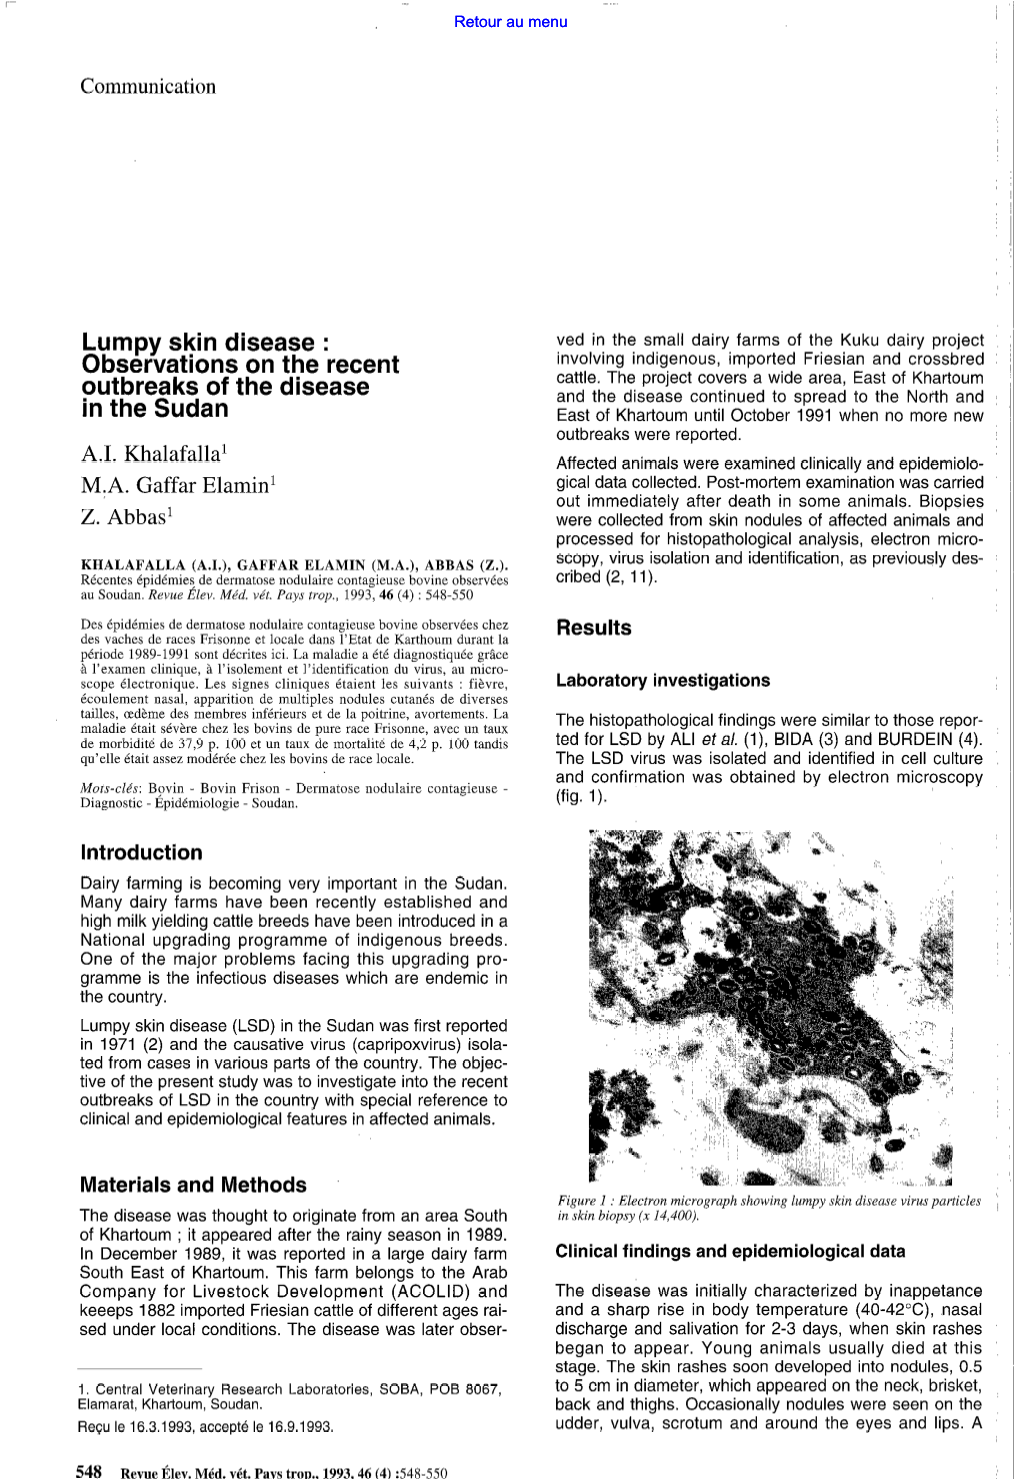 Lumpy Skin Disease : Ved in the Small Dairy Farms of the Kuku Dairy Project Involving Indigenous, Imported Friesian and Crossbred Observations on the Recent Cattle